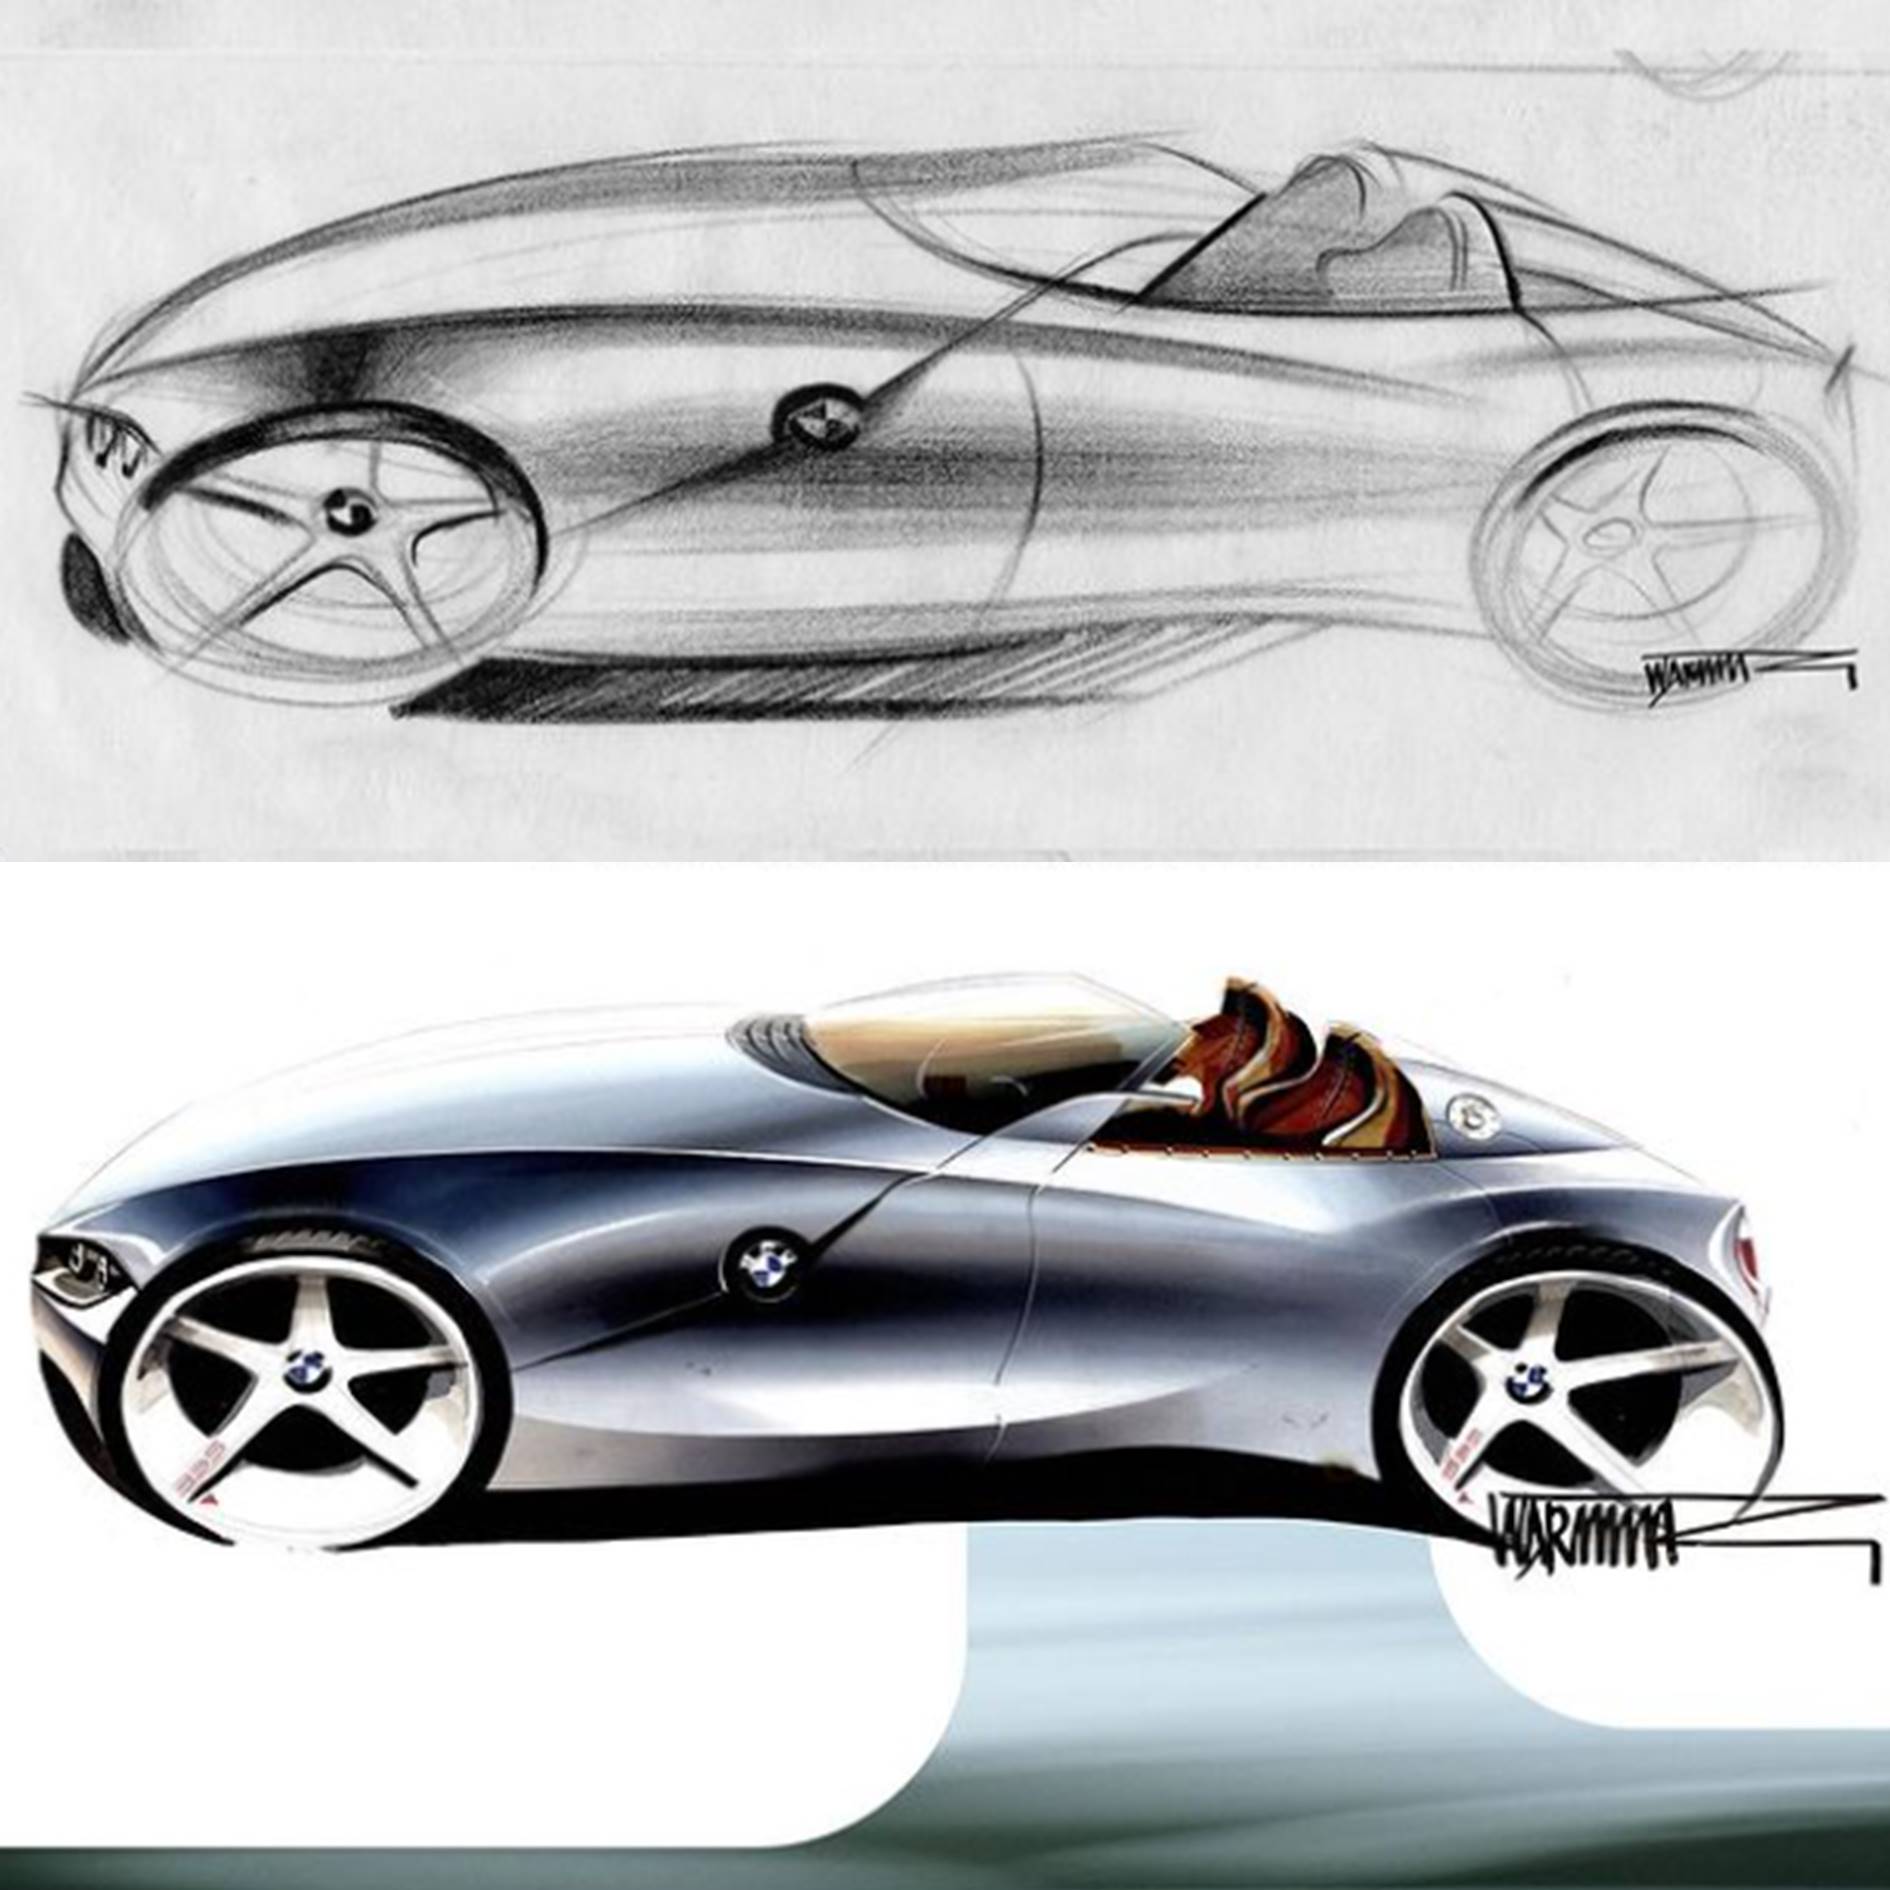 Black and white and color sketch of a roadster seen from the side.